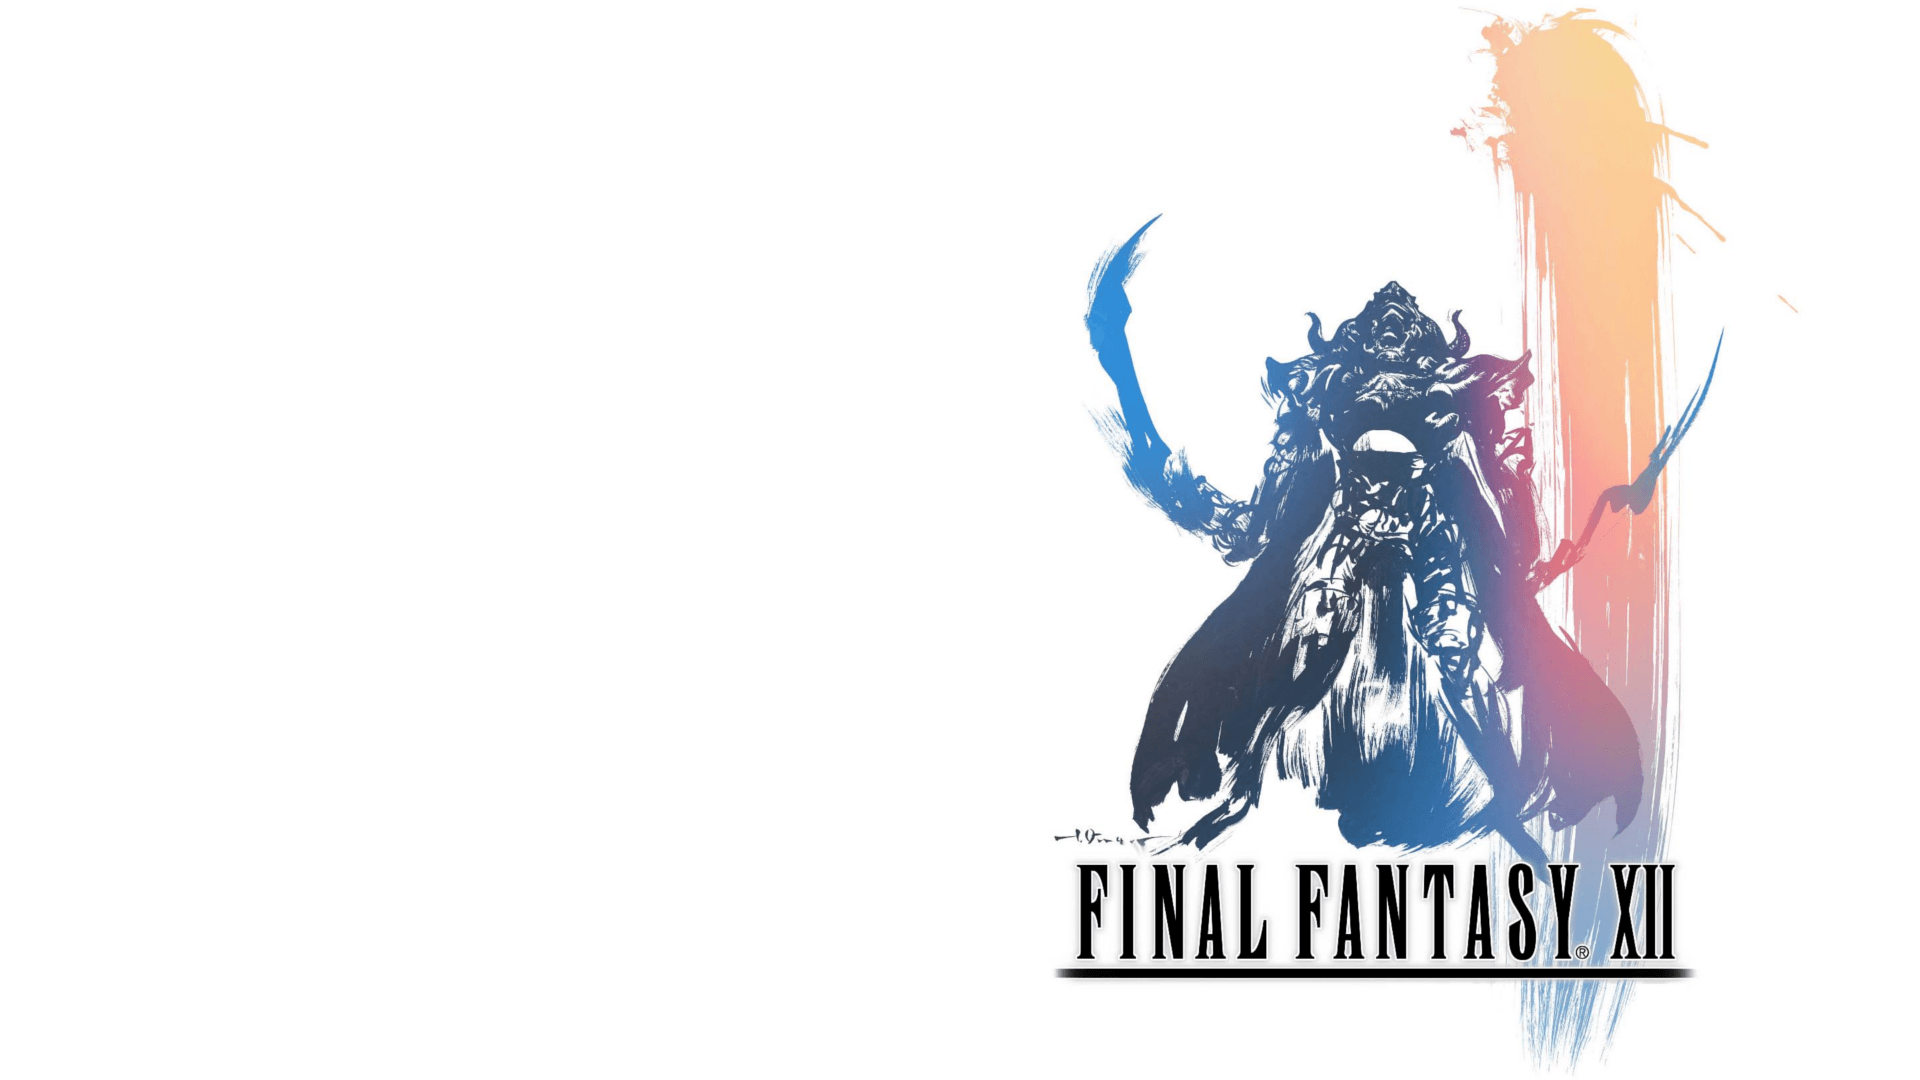 Final Fantasy XII Full HD Wallpaper and Background Imagex1080